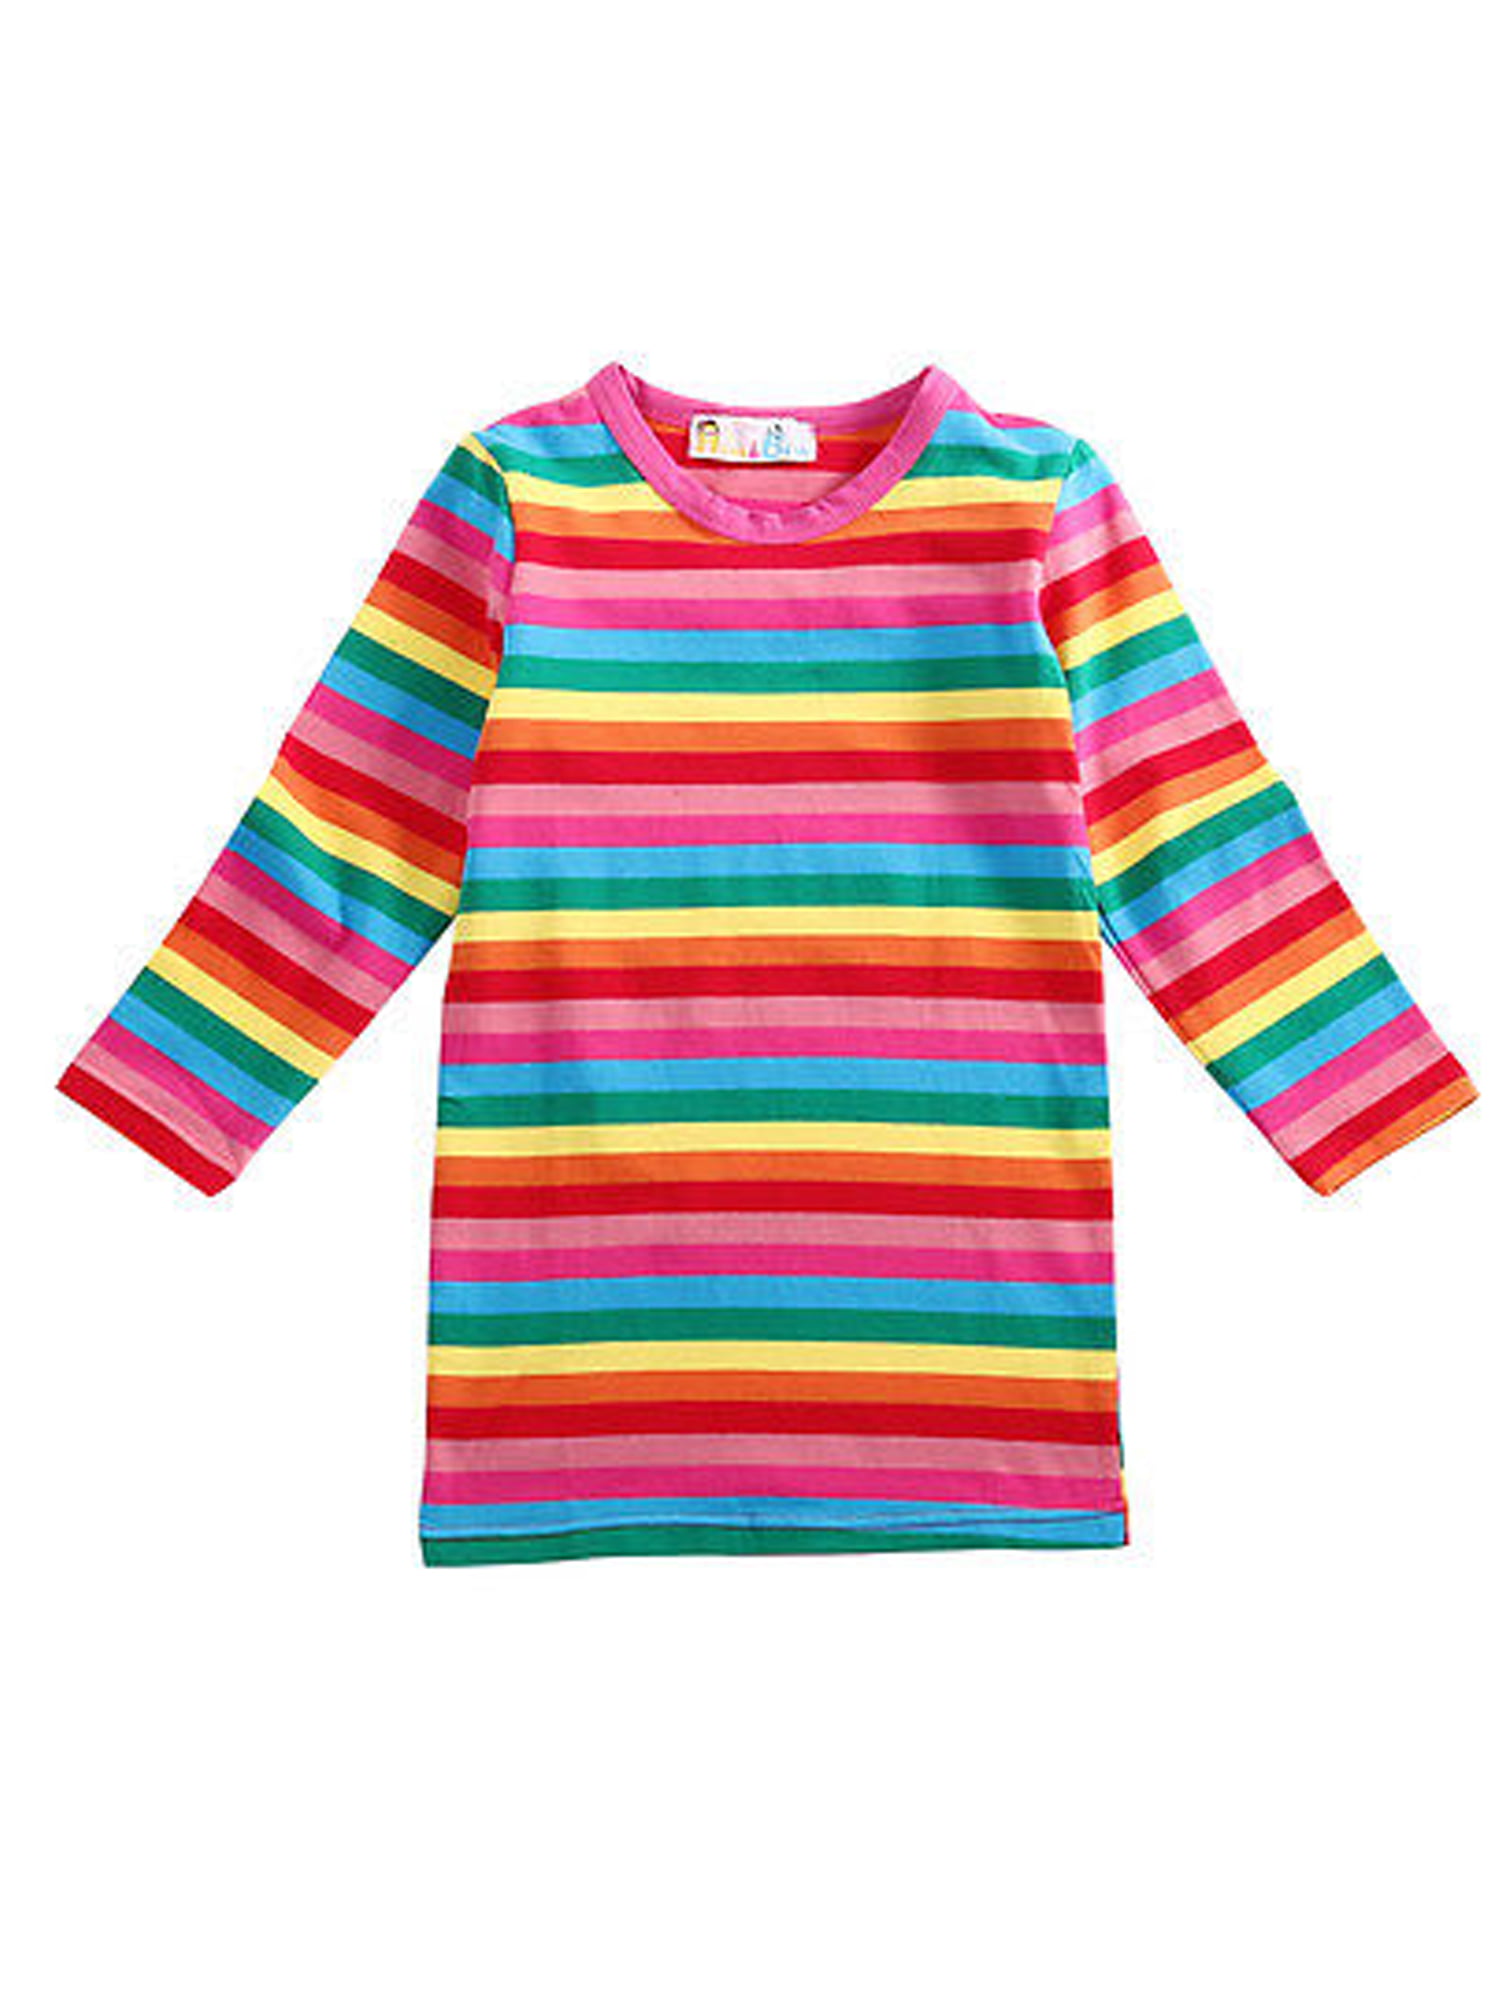 Baby Girls Fall Soft Rainbow Top Blouse Long Sleeve Toddler Casual Tops 